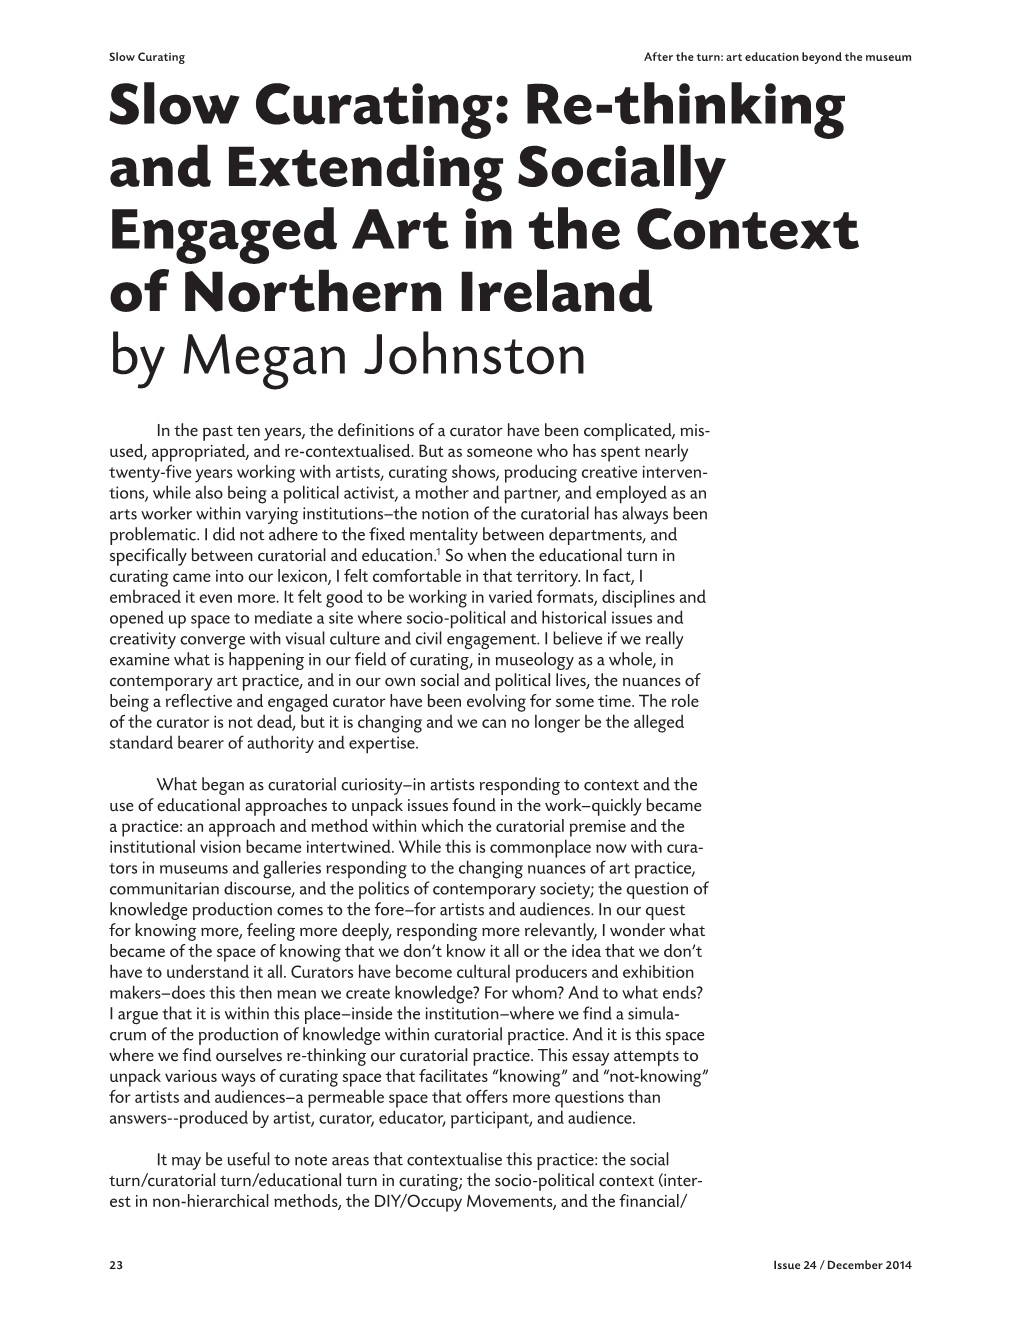 Re-Thinking and Extending Socially Engaged Art in the Context of Northern Ireland by Megan Johnston